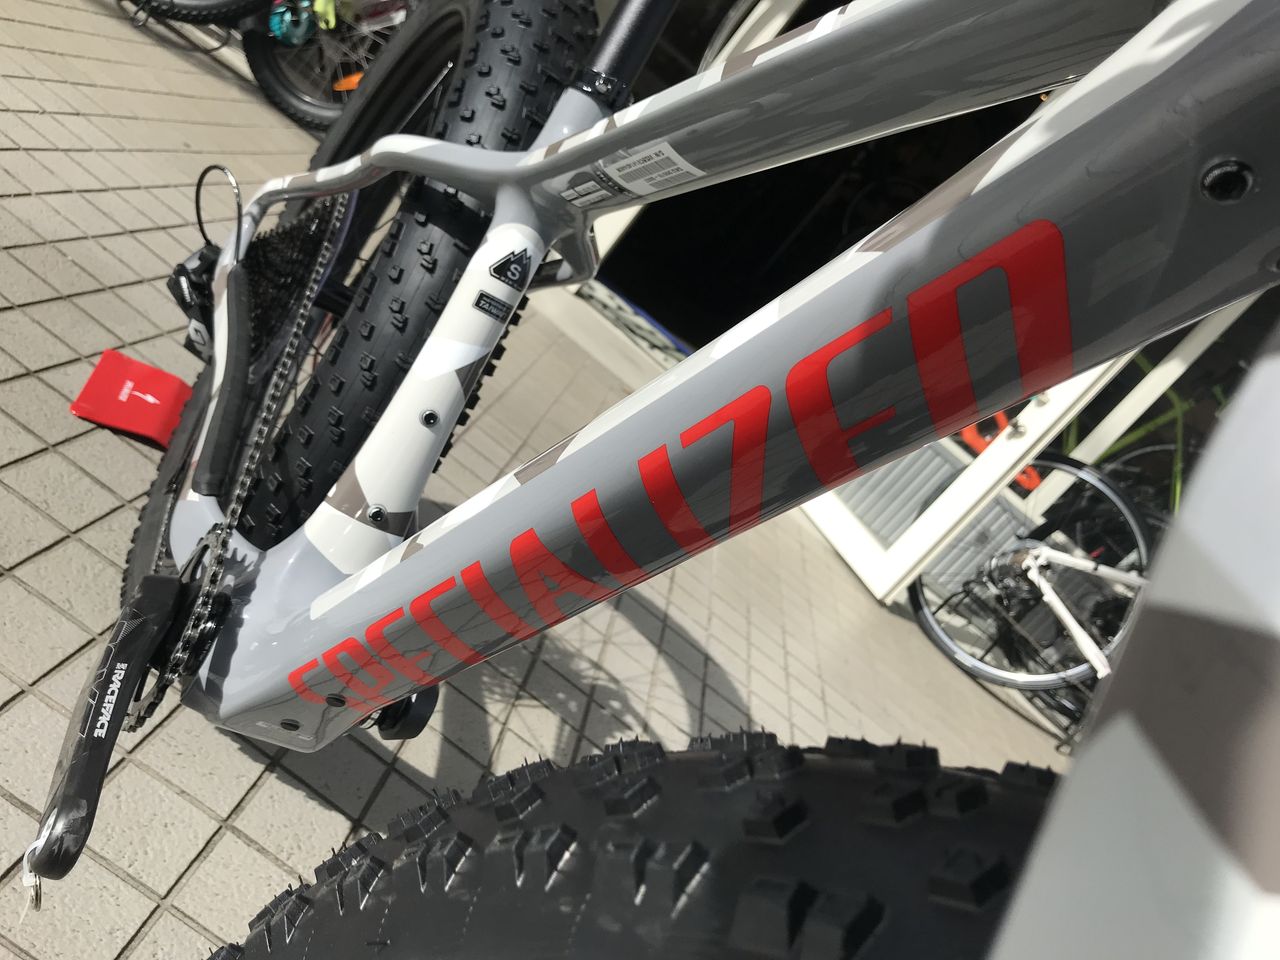 FATBIKE】SPECIALIZEDから2019年モデル「FATBOY COMP CARBON」が入荷